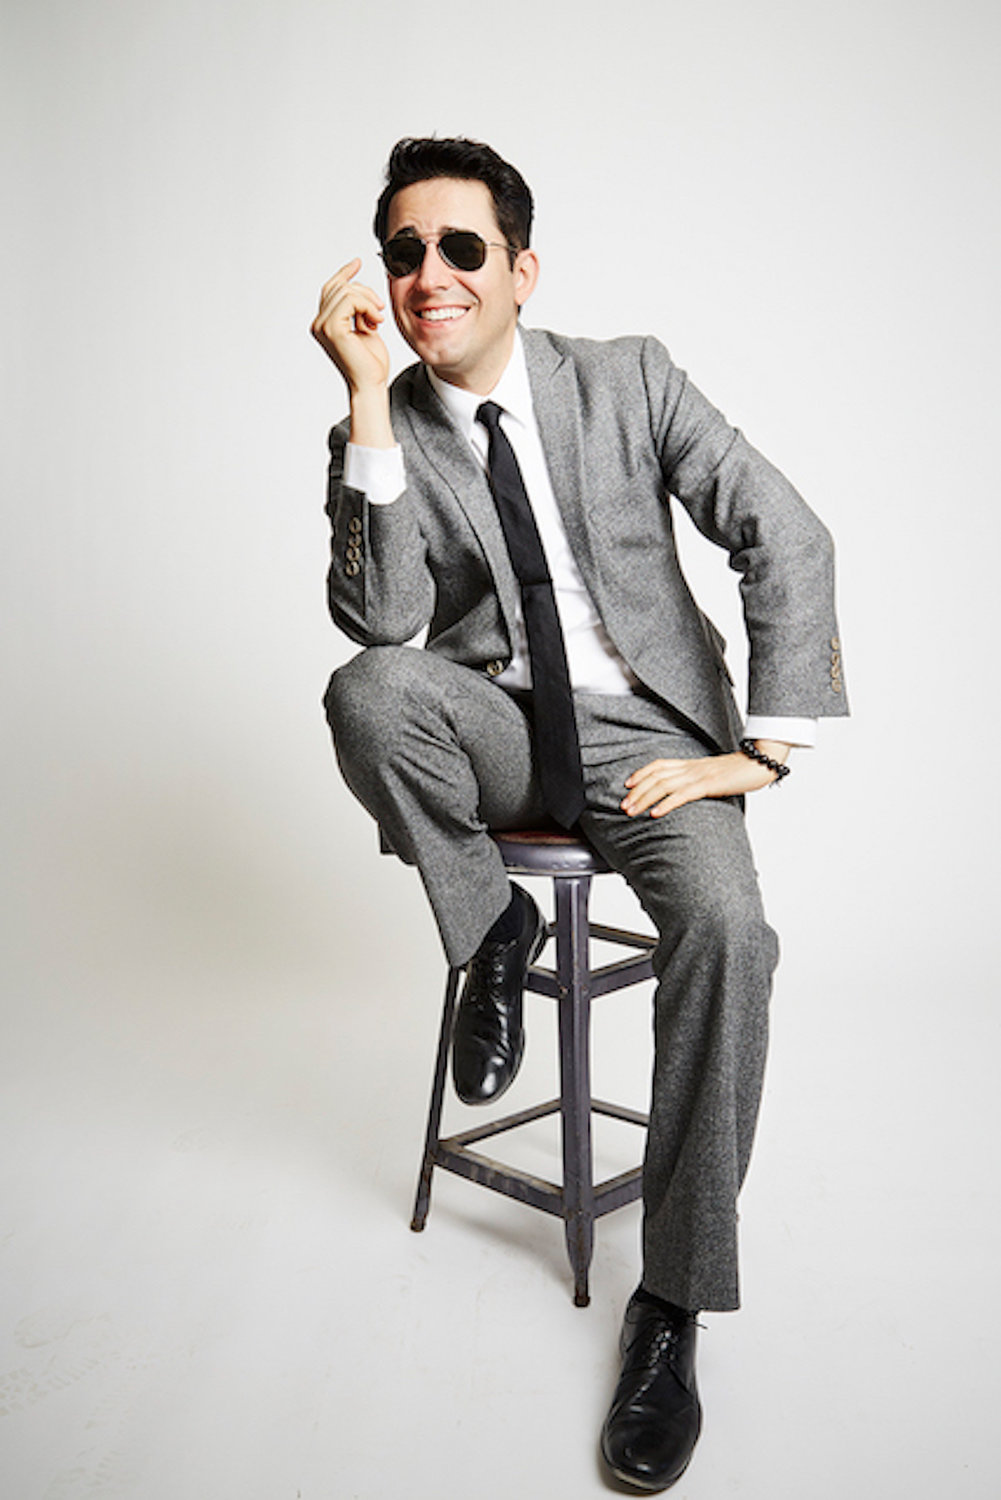 John Lloyd Young will perform on Thursday, Aug. 25, at View in Old Forge.